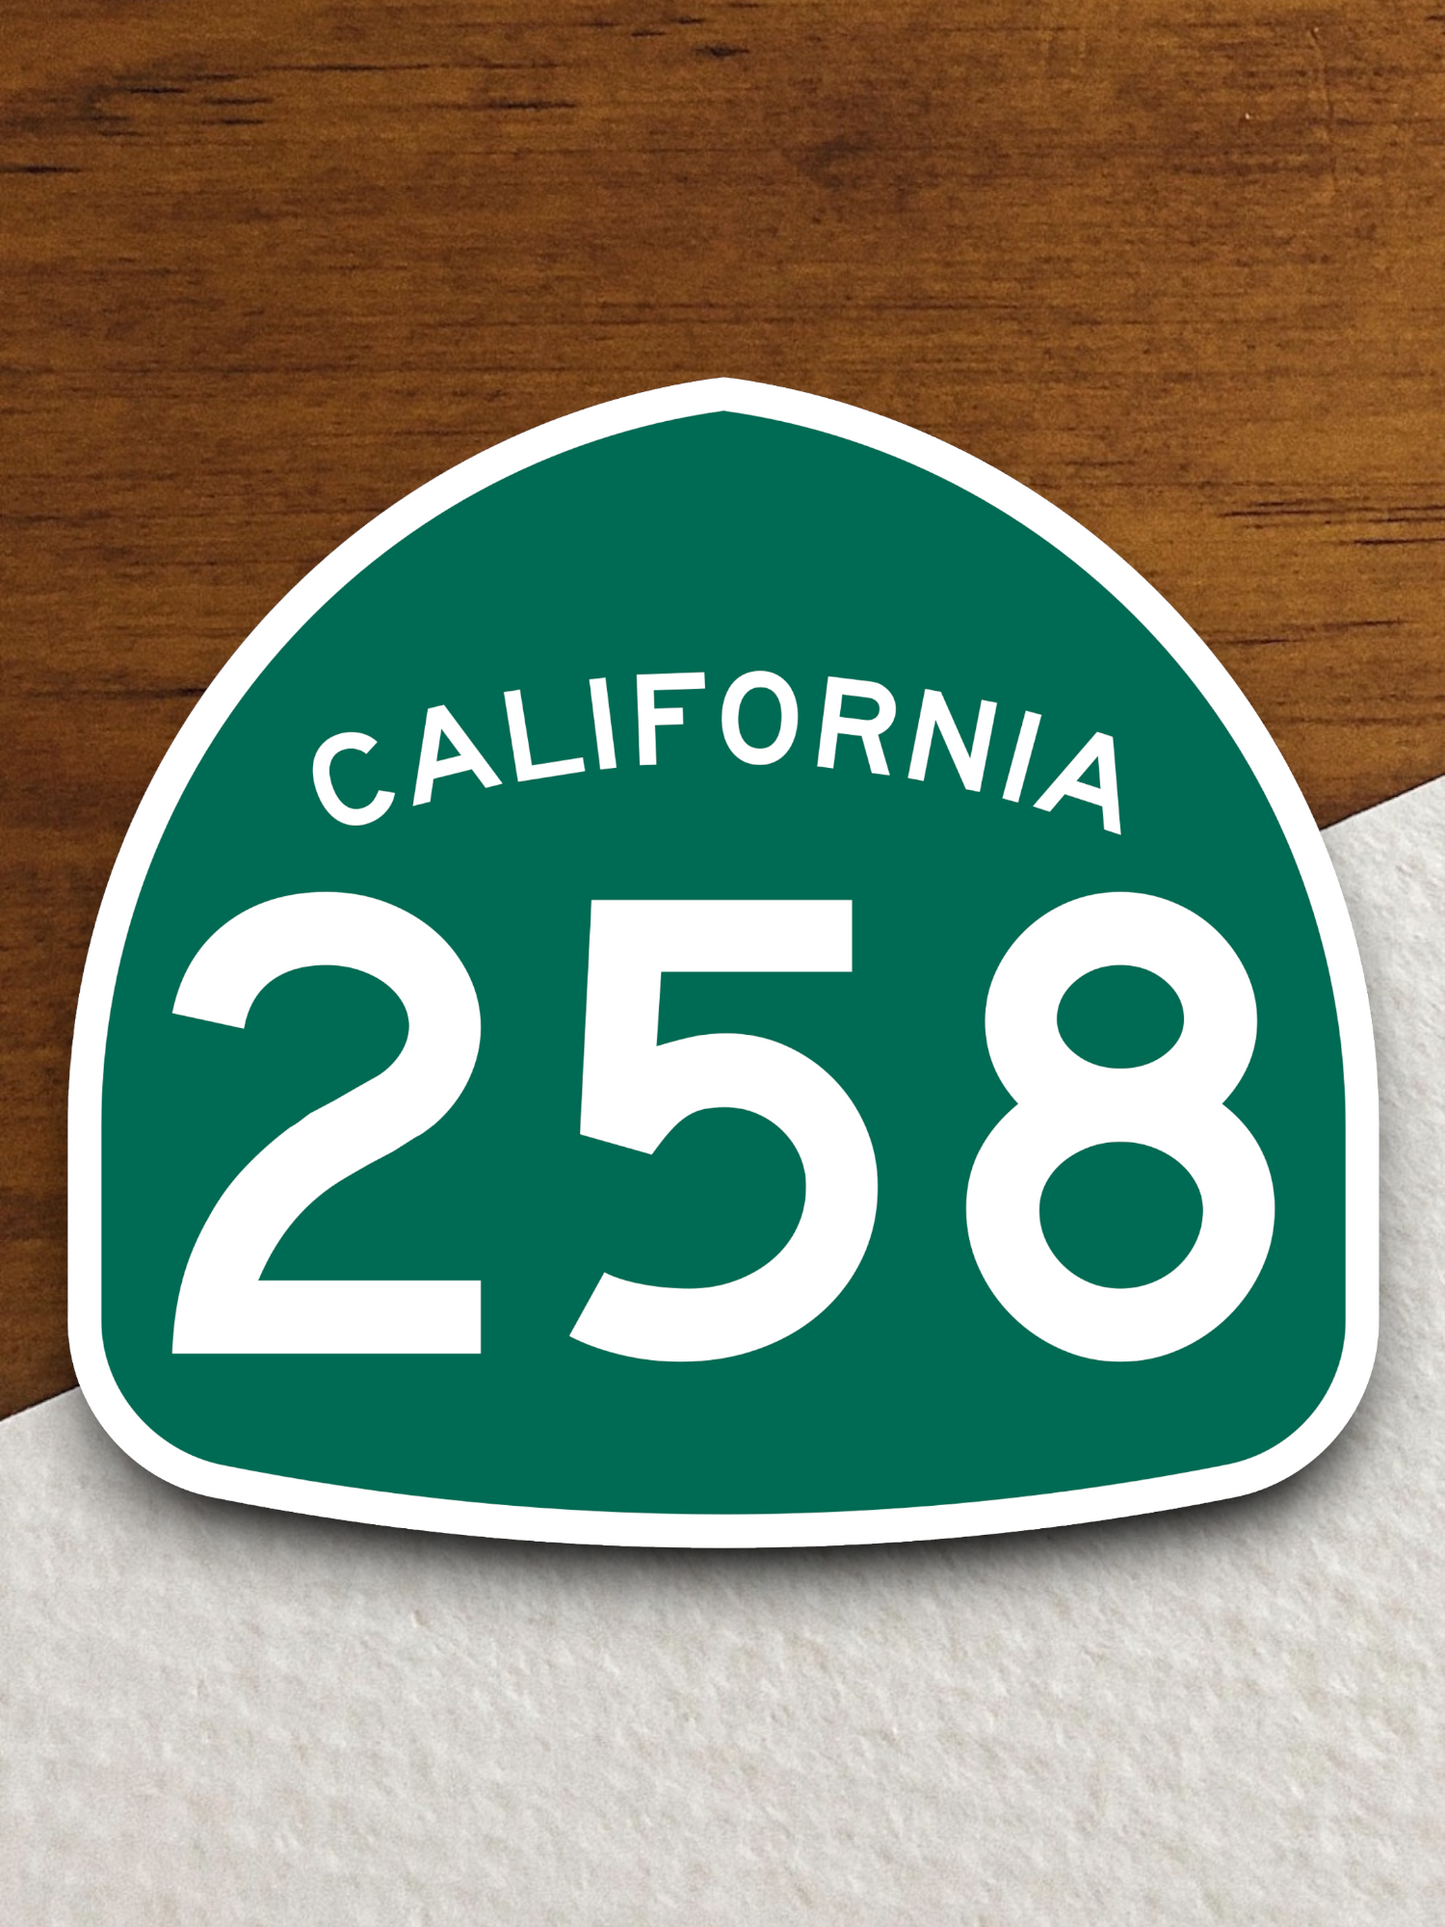 California State Route 258 Road Sign Sticker